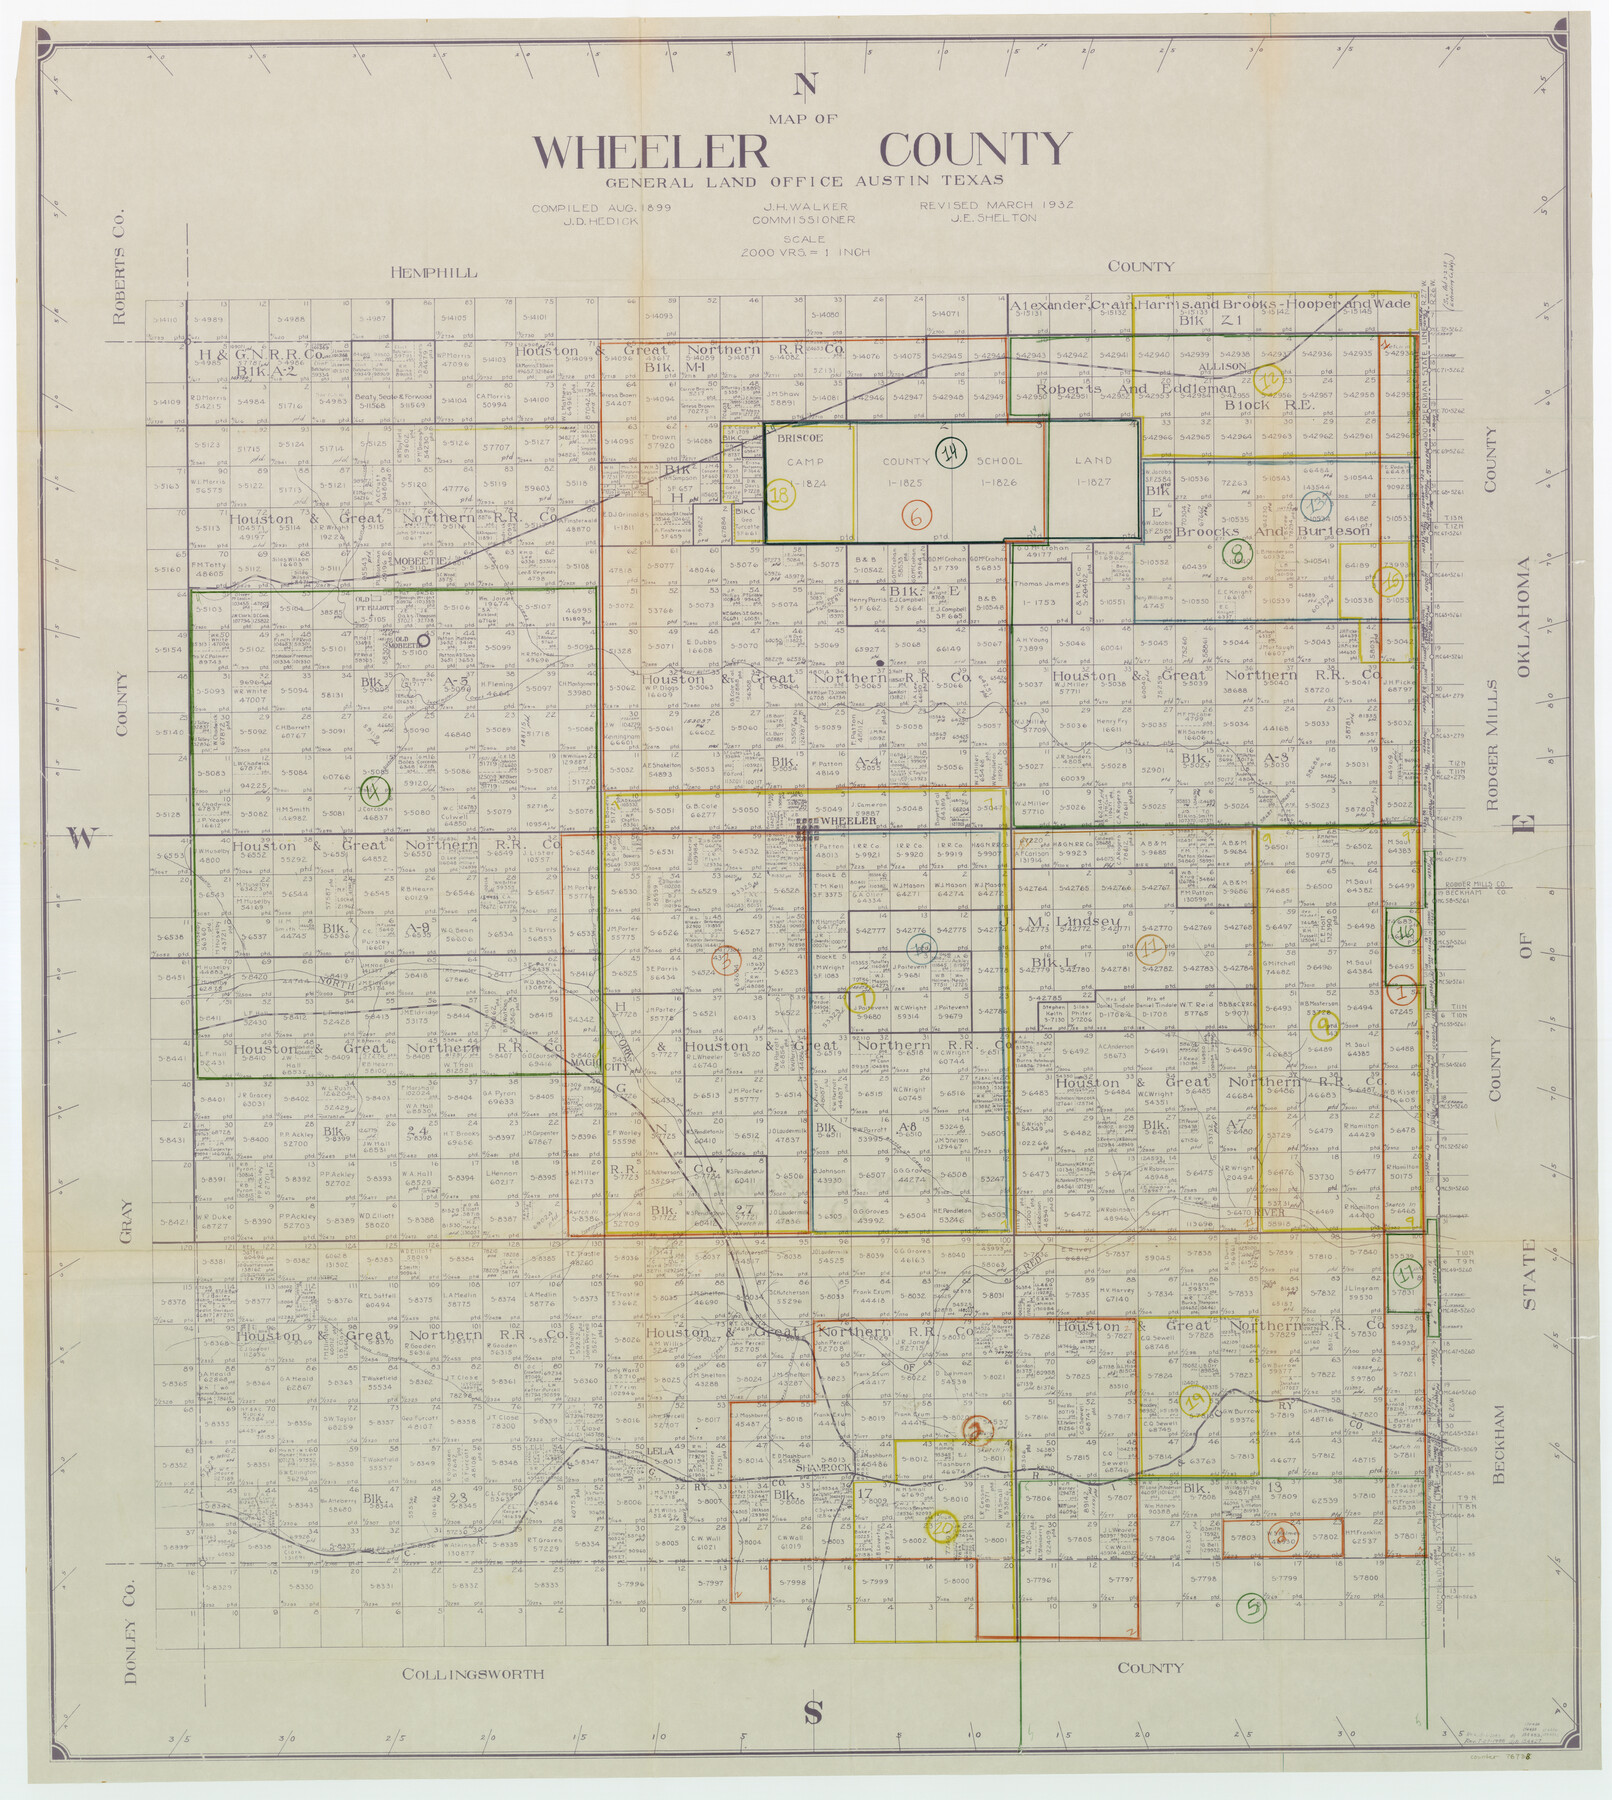 76738, Wheeler County Working Sketch Graphic Index, General Map Collection